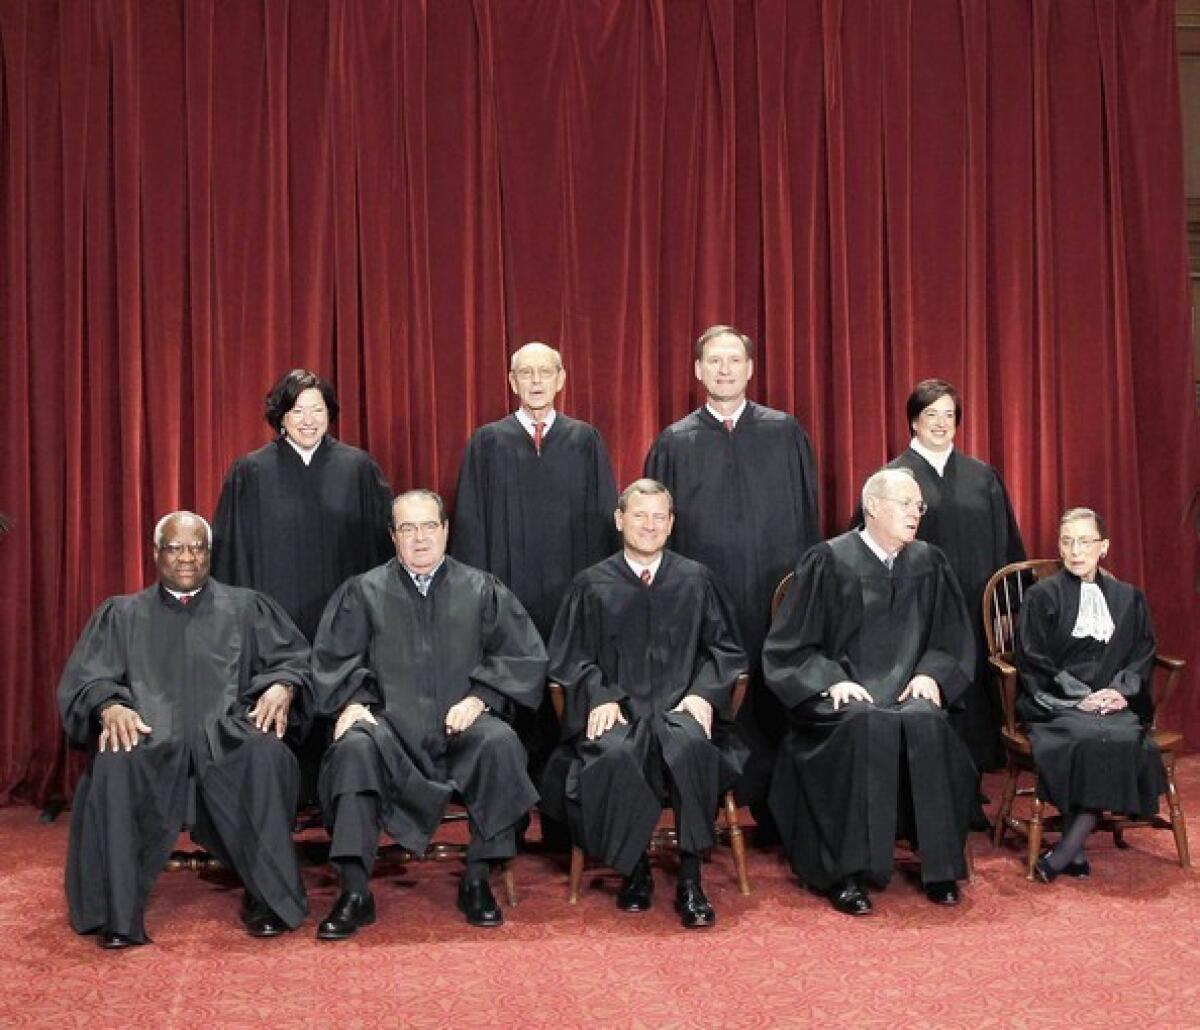 The Supreme Court has four justices in their 70s, so the next president will likely have vacancies to fill.